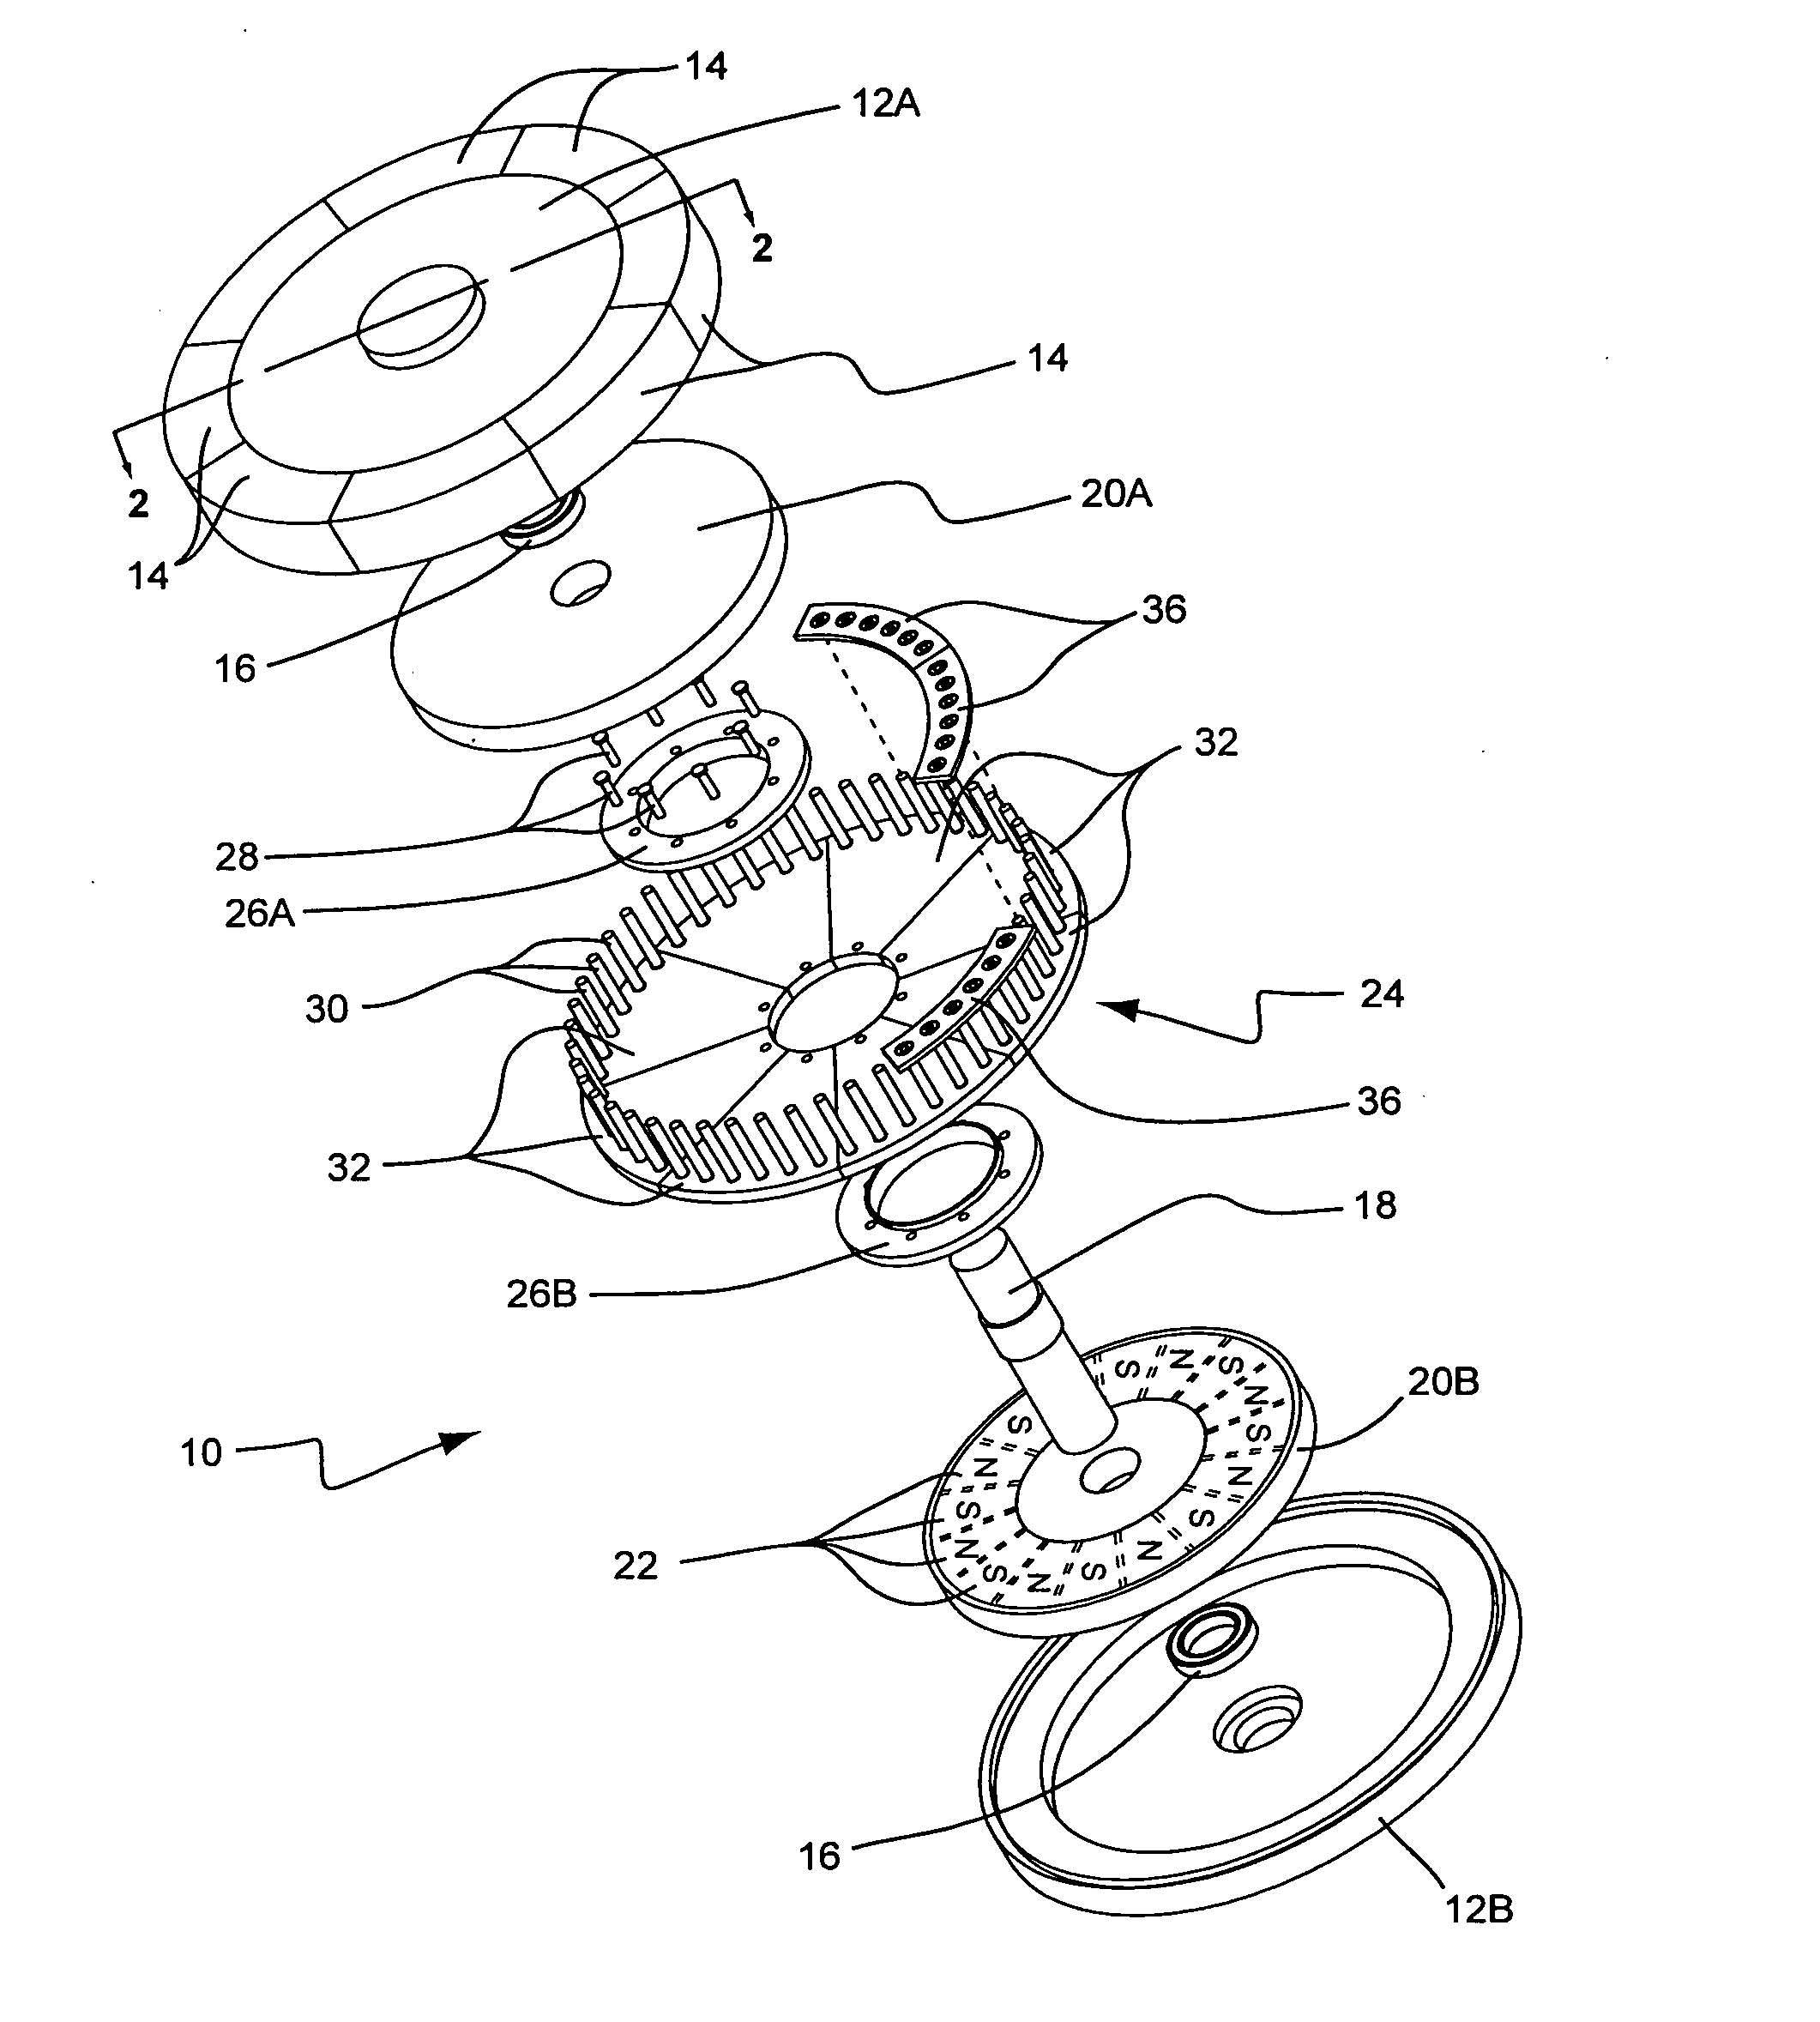 Segmented stator for an axial field device